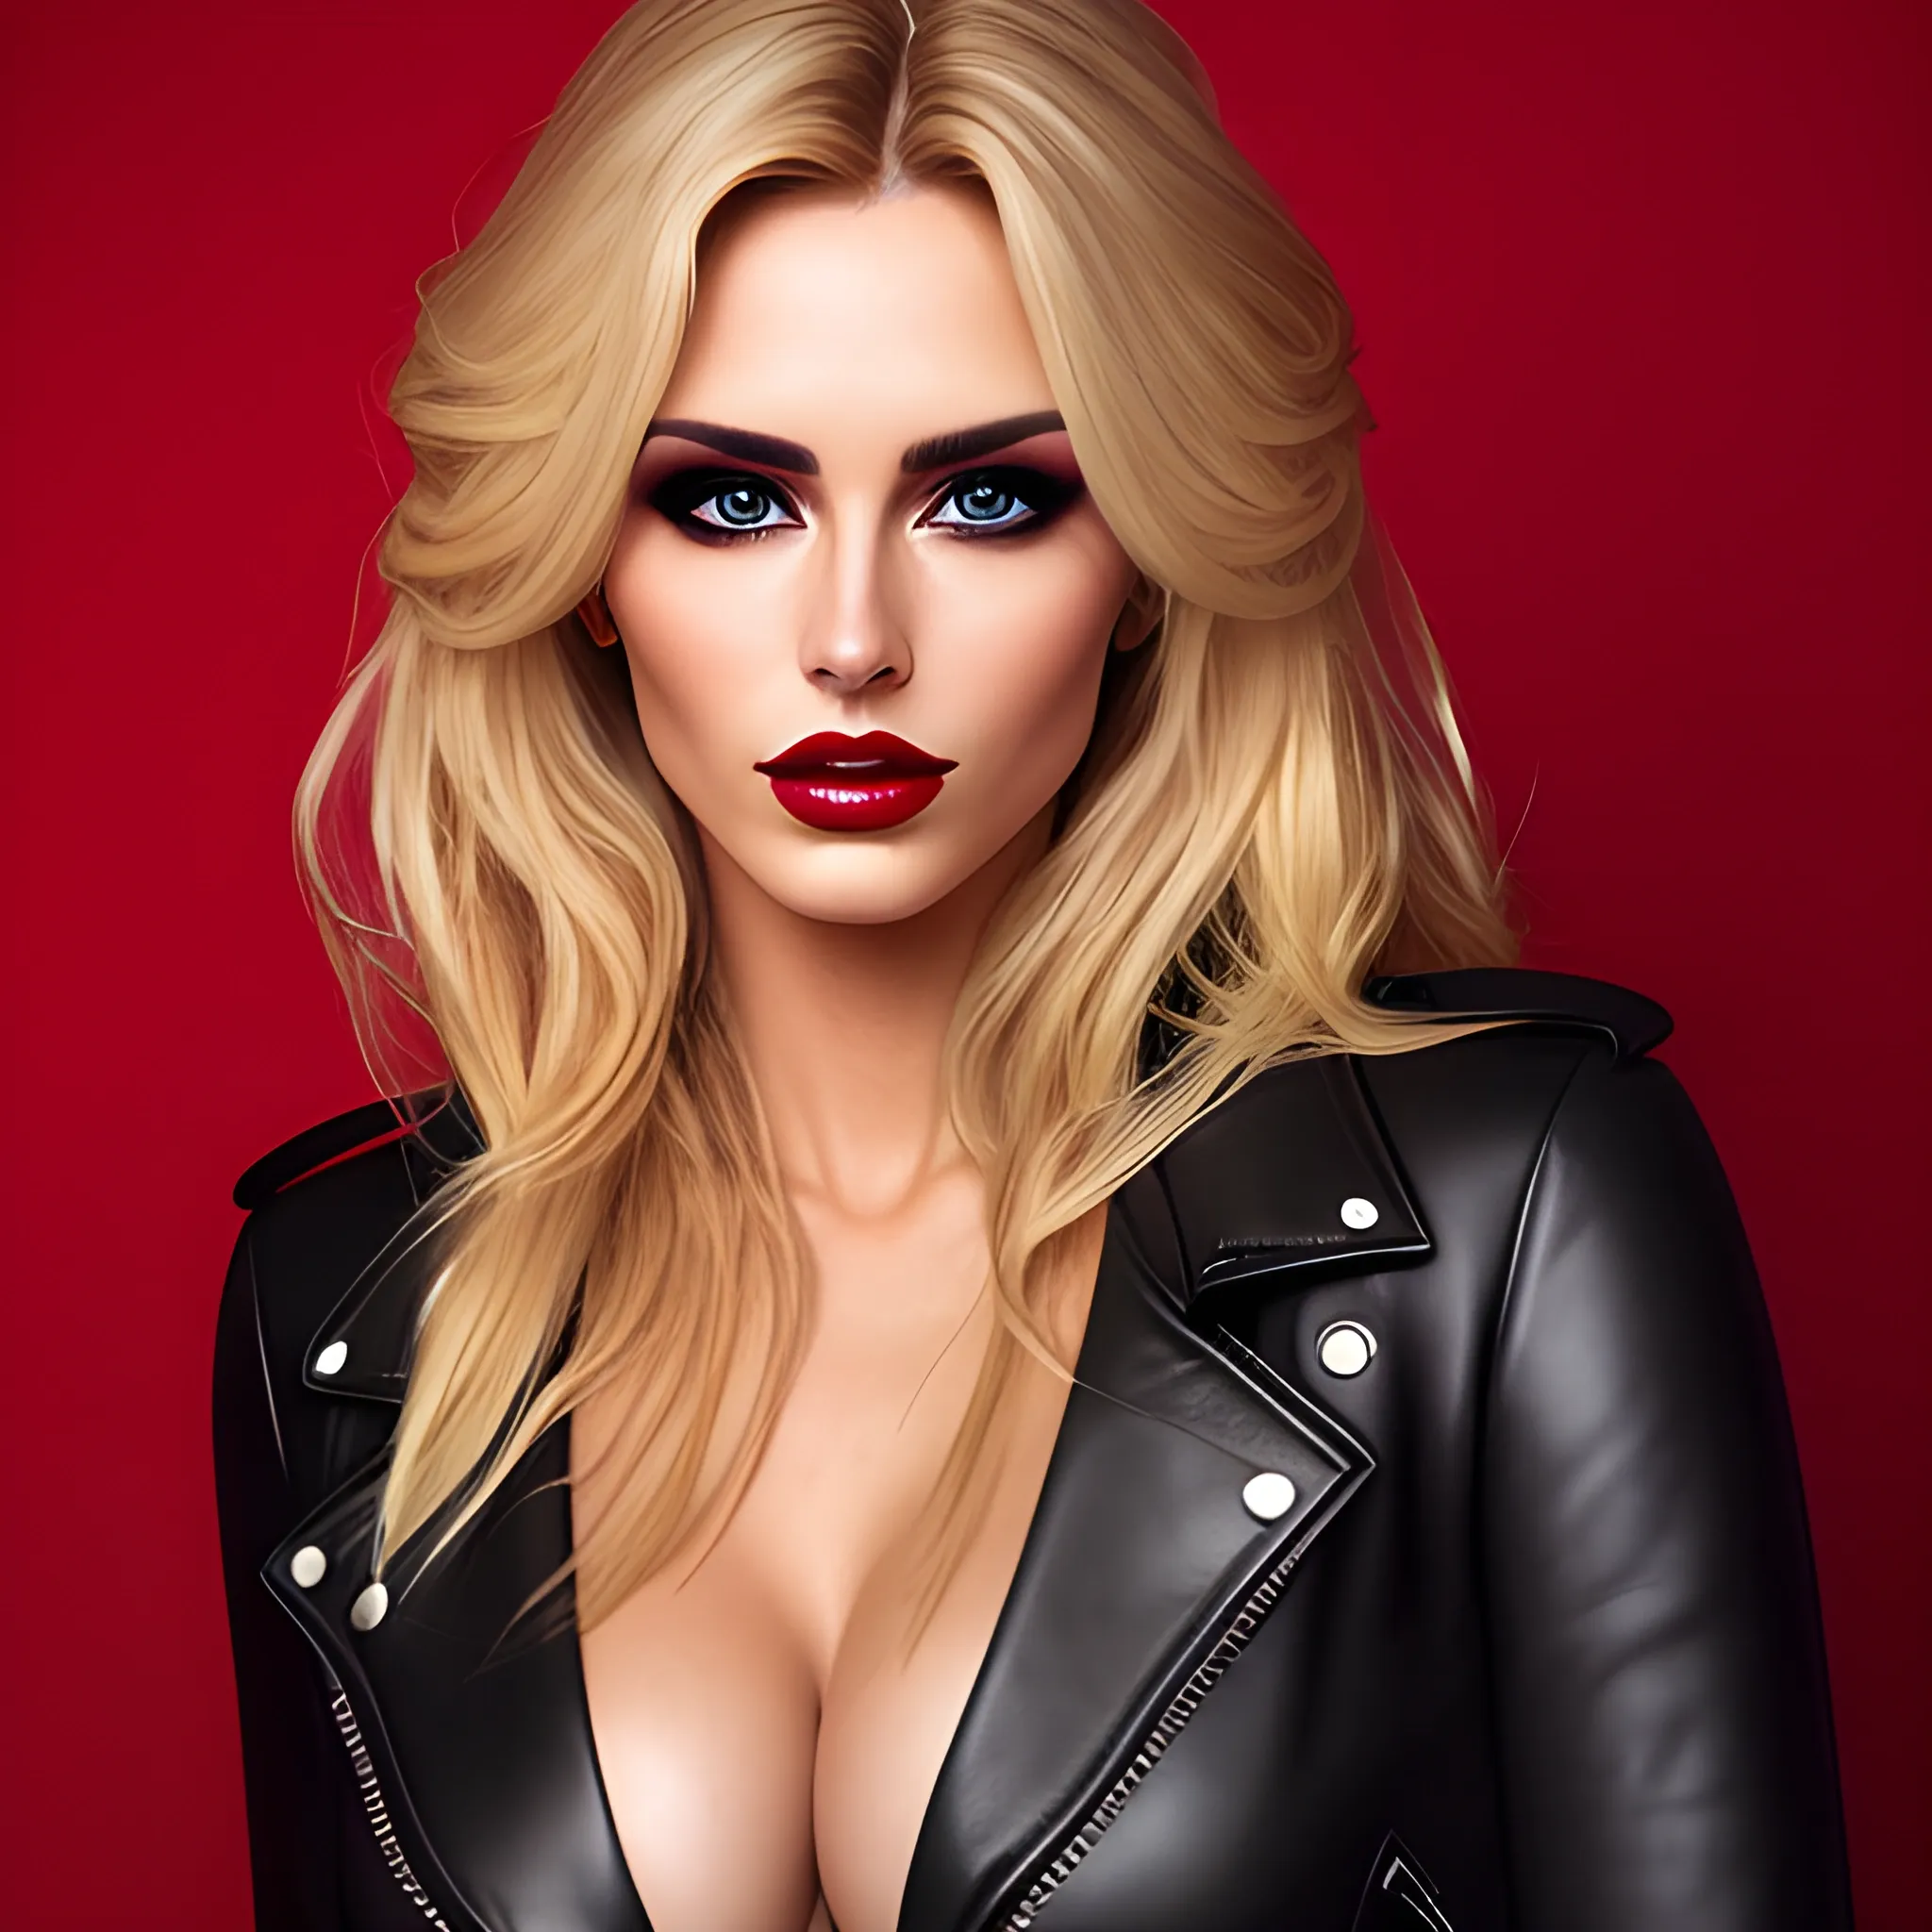 portrait of beautiful girl with long blonde messy hair and stunning open black leather jacket, about 20 years old, seductive look, red puffy lips, stunning, erotic, dark background, highest quality
